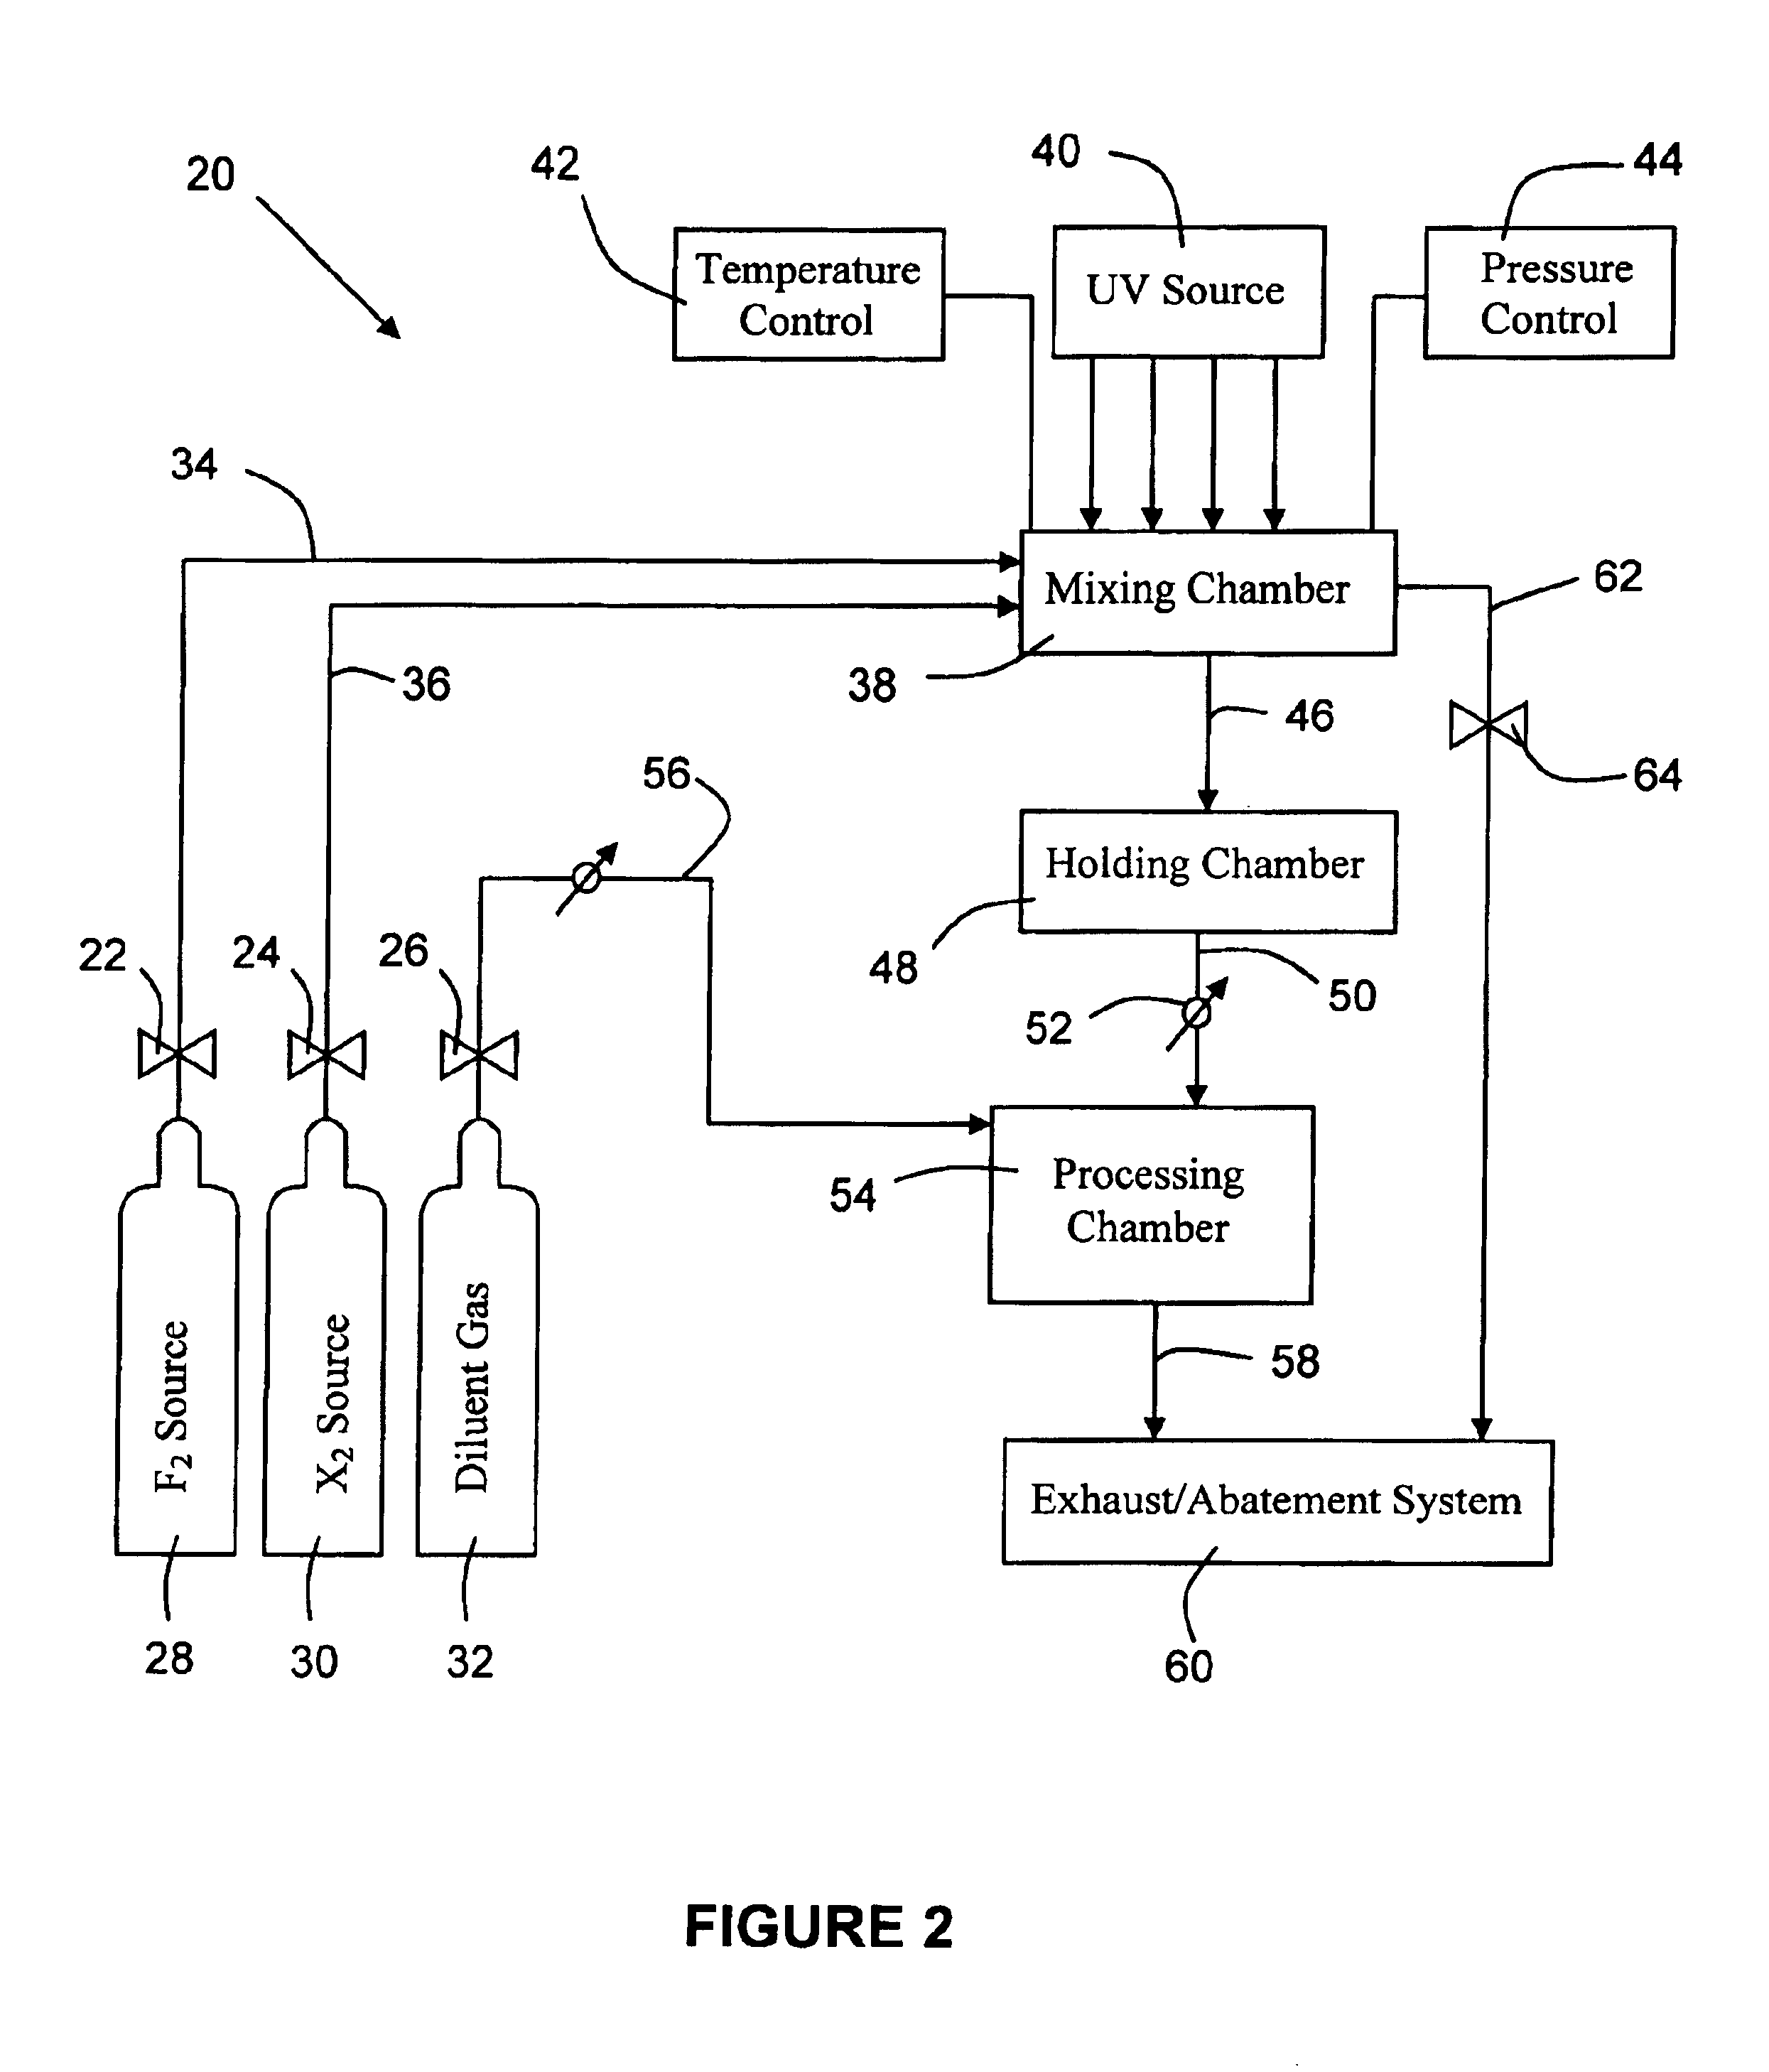 System for in-situ generation of fluorine radicals and/or fluorine-containing interhalogen (XFn) compounds for use in cleaning semiconductor processing chambers